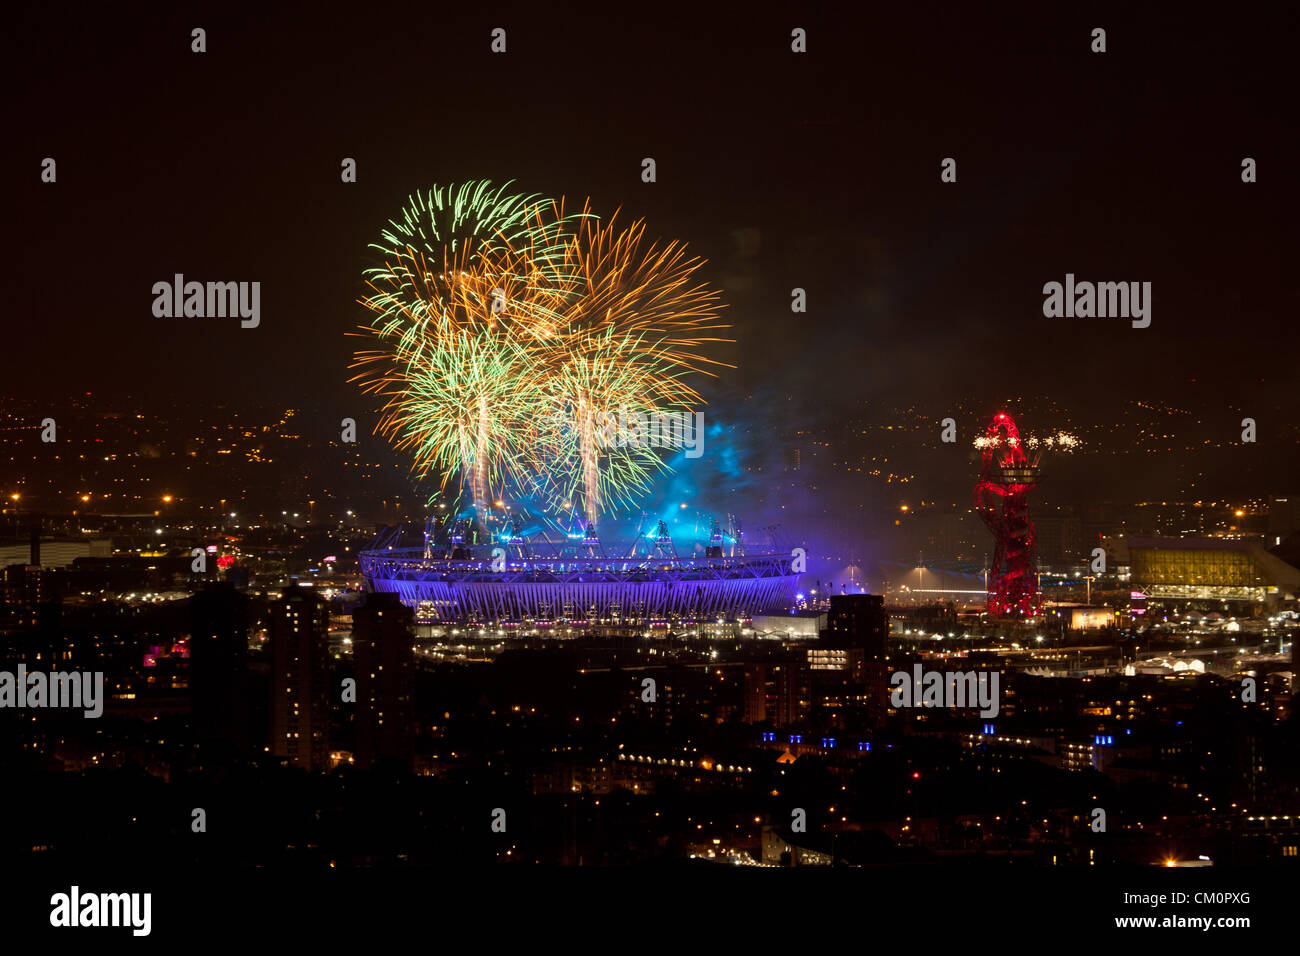 LONDON, UK, 9th Sep, 2012. Fireworks light up the sky over the Olympic Stadium during the 2012 Paralympics closing ceremony, as seen from Canary Wharf, the financial centre in London's historic docklands. Stock Photo